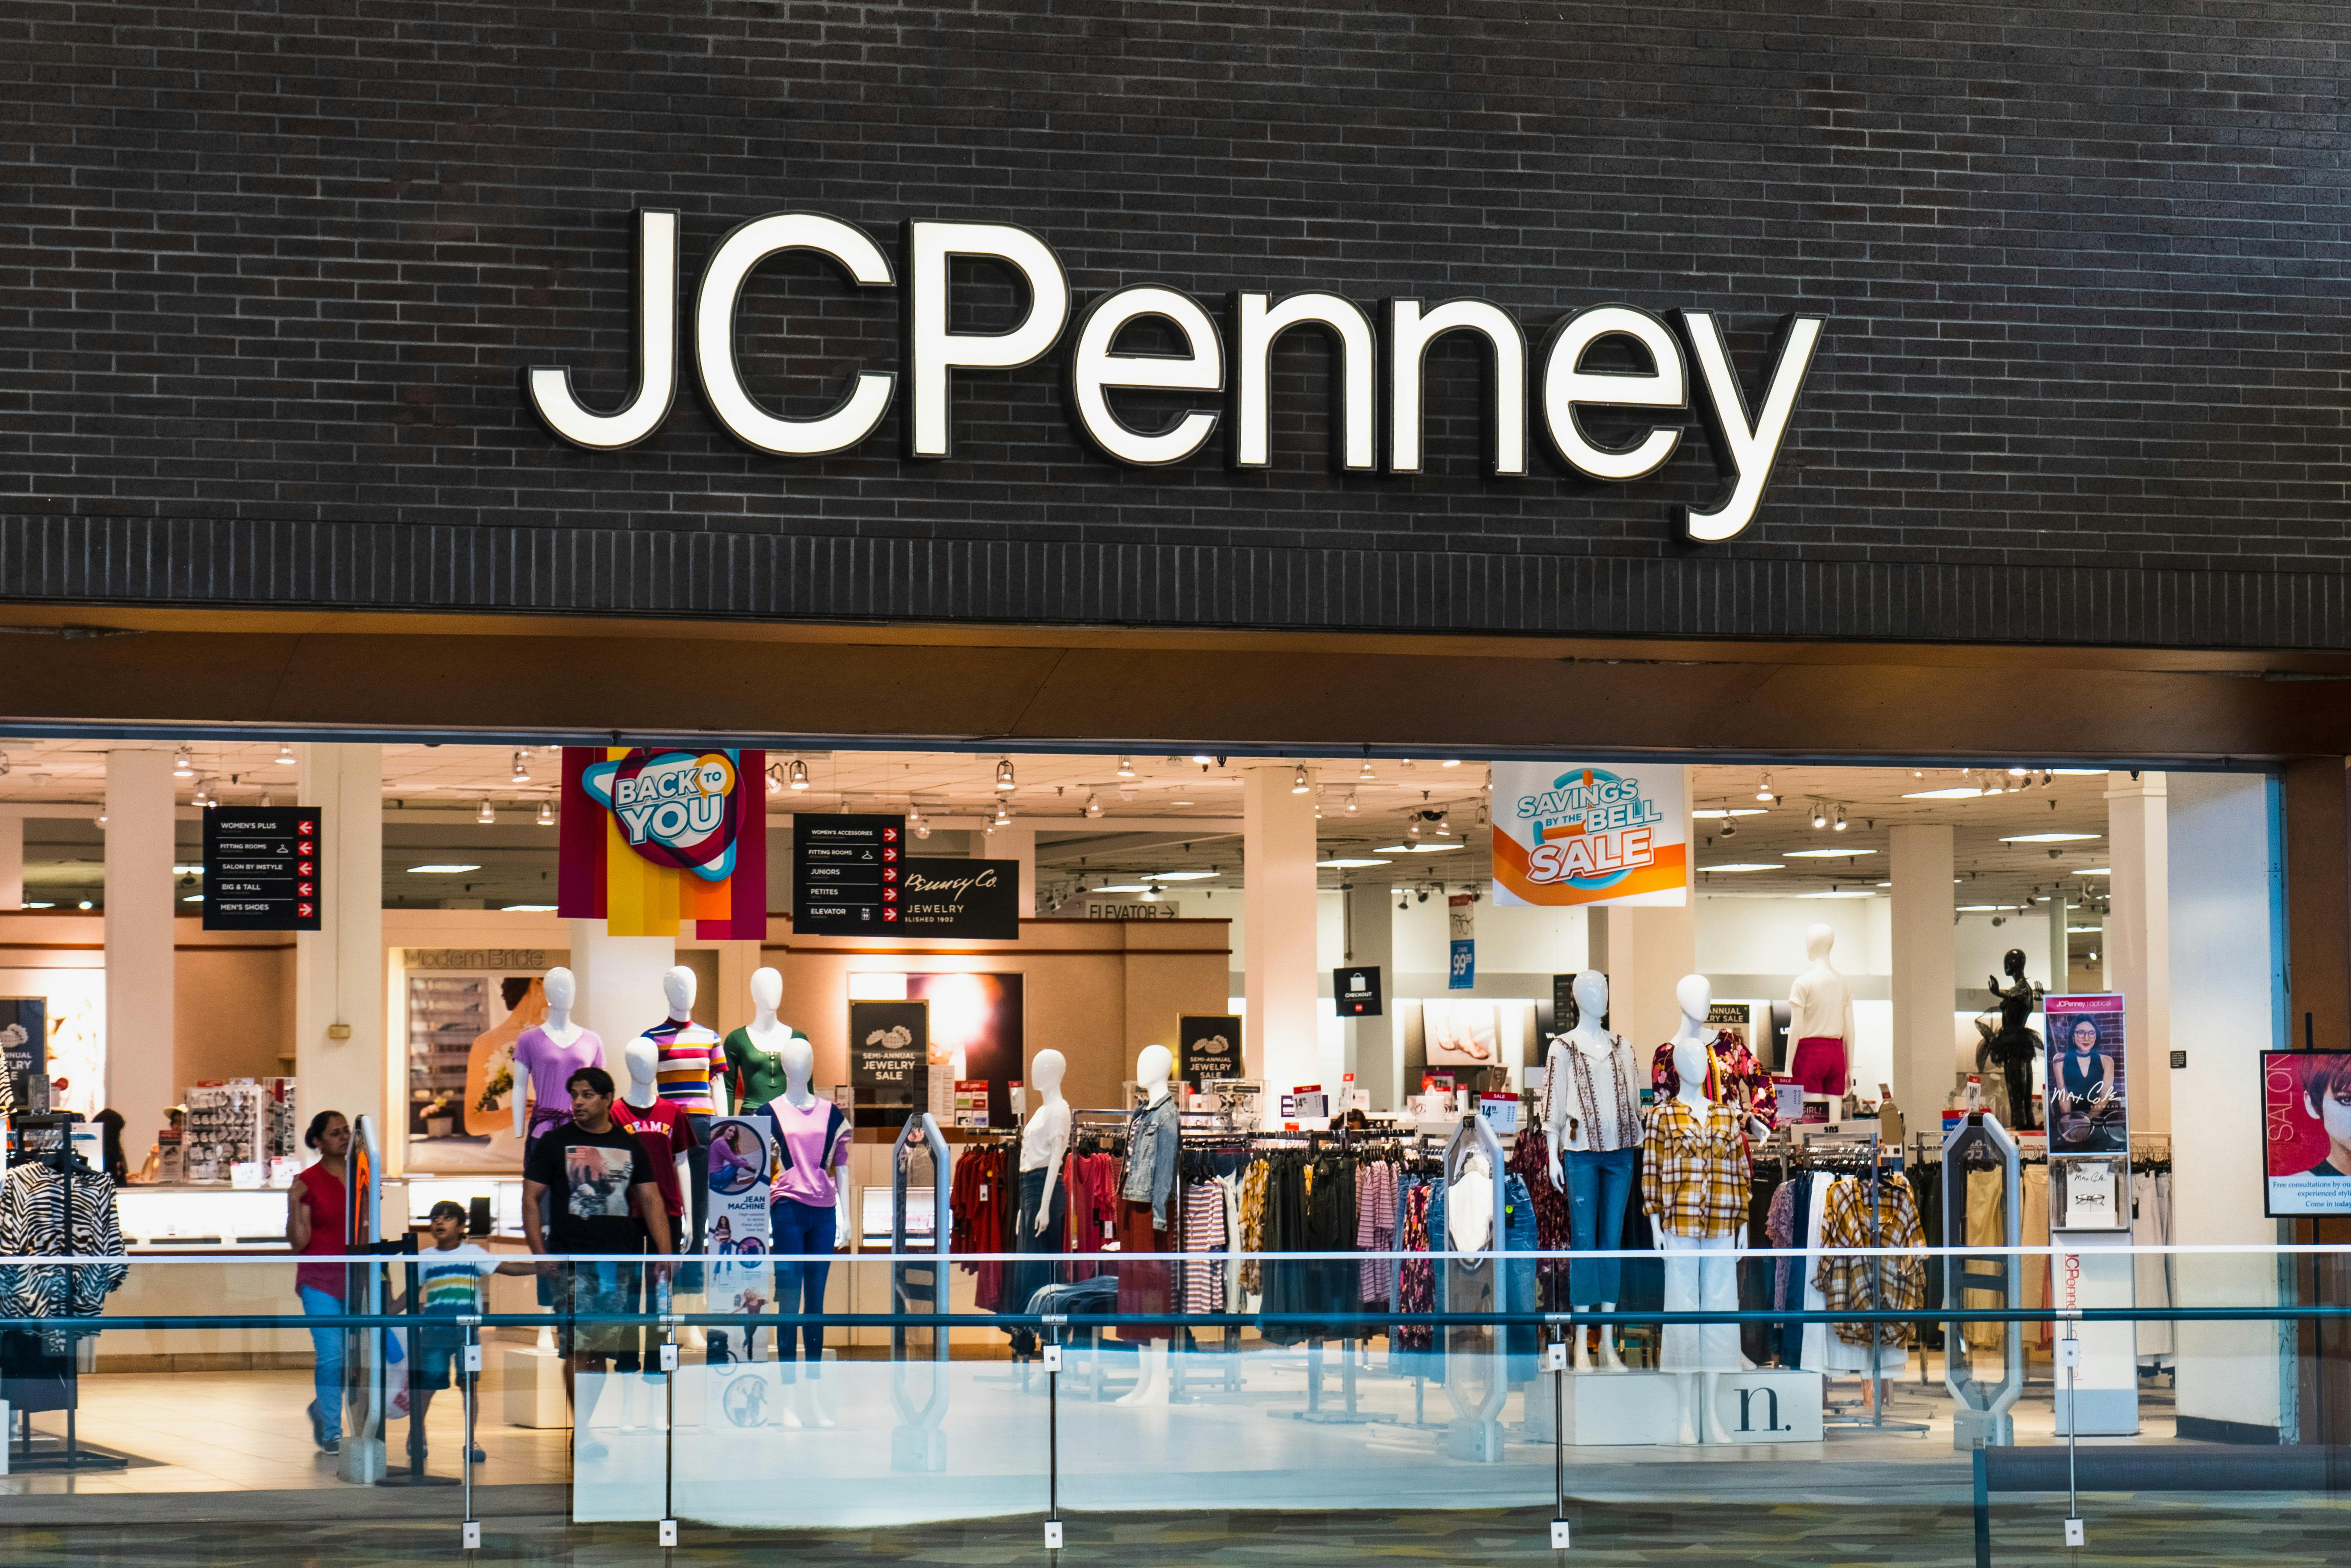 JCPenney is closing 140 stores — see if your store could be one of